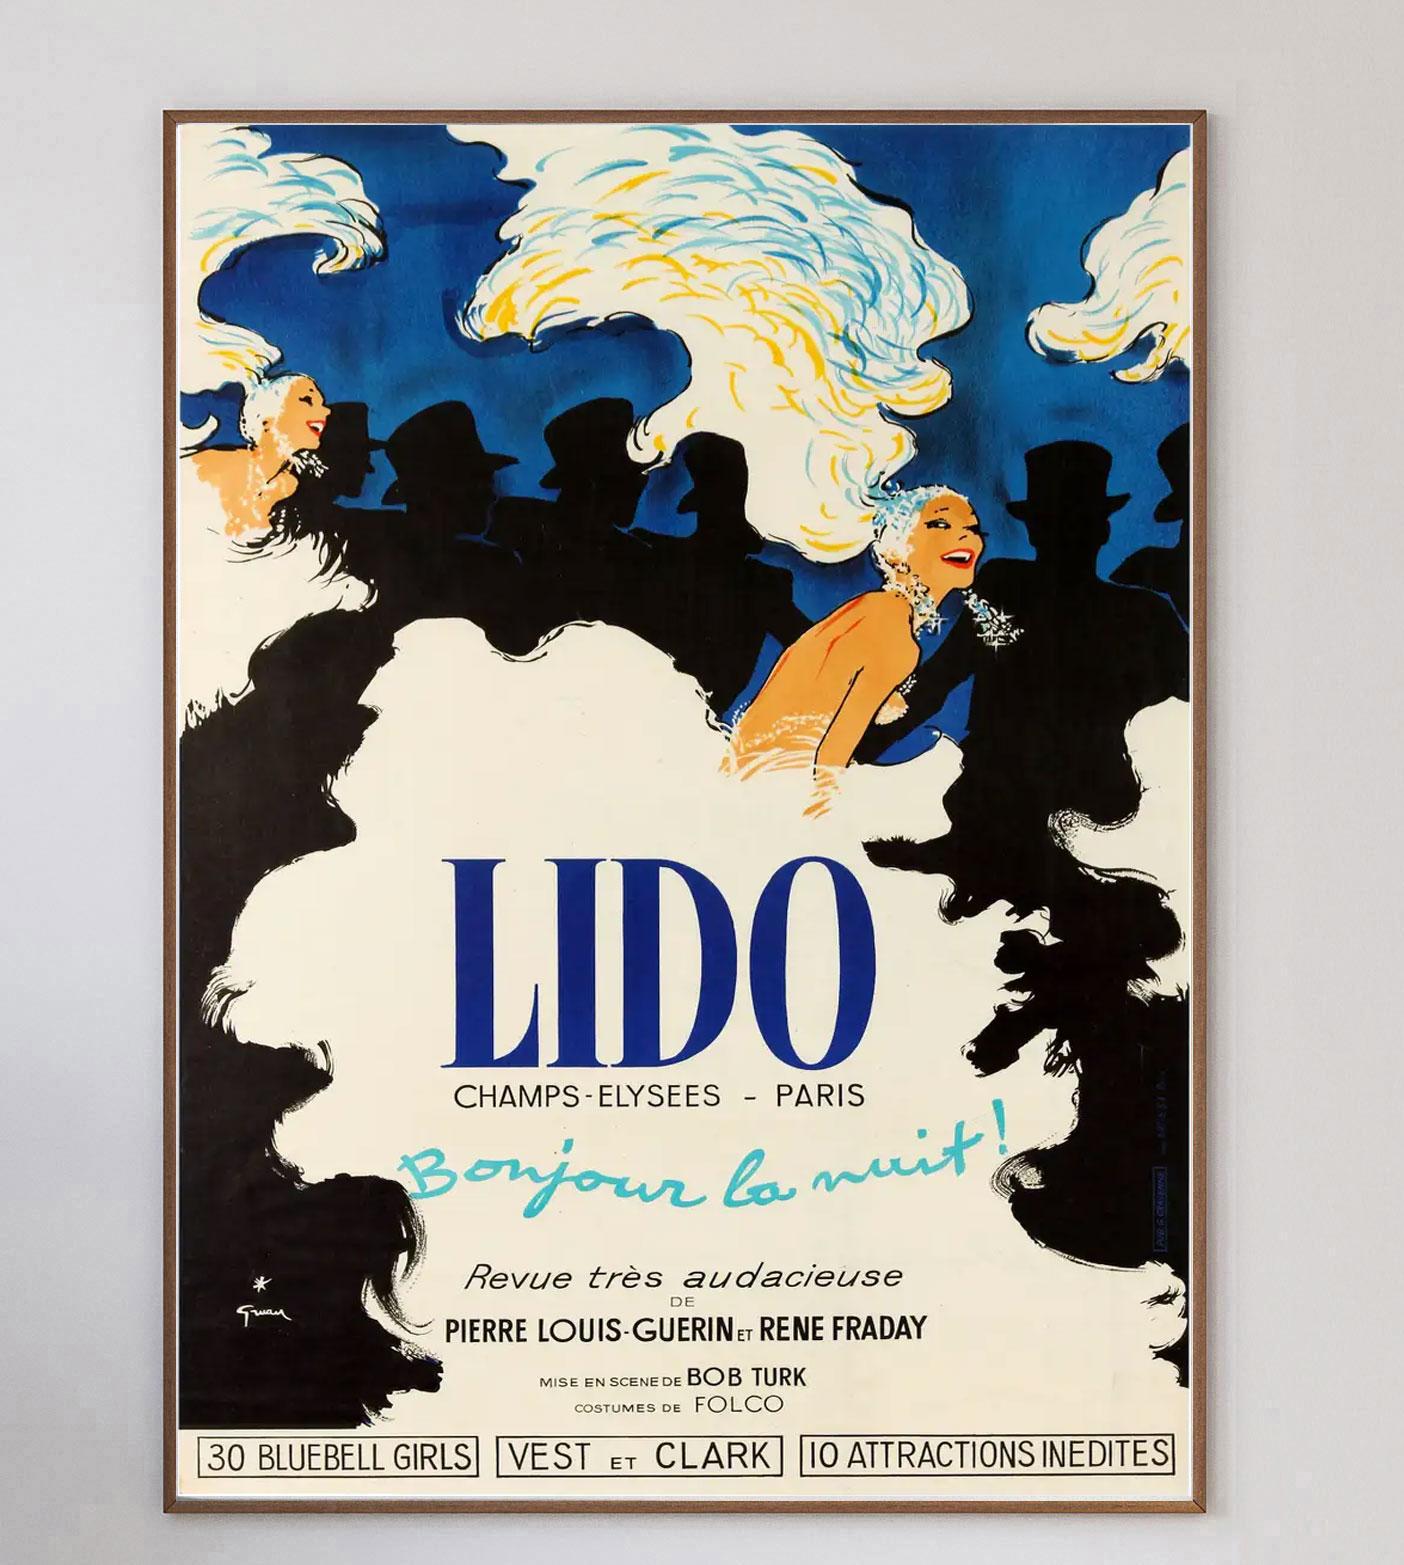 A beautifully illustrated poster for the Lido in Paris on the Champs Elysees, the artwork was created by iconic poster designer Rene Gruau. Gruau was well known for his collaborations with the Lido and the likes of Moulin Rouge and Christian Dior.